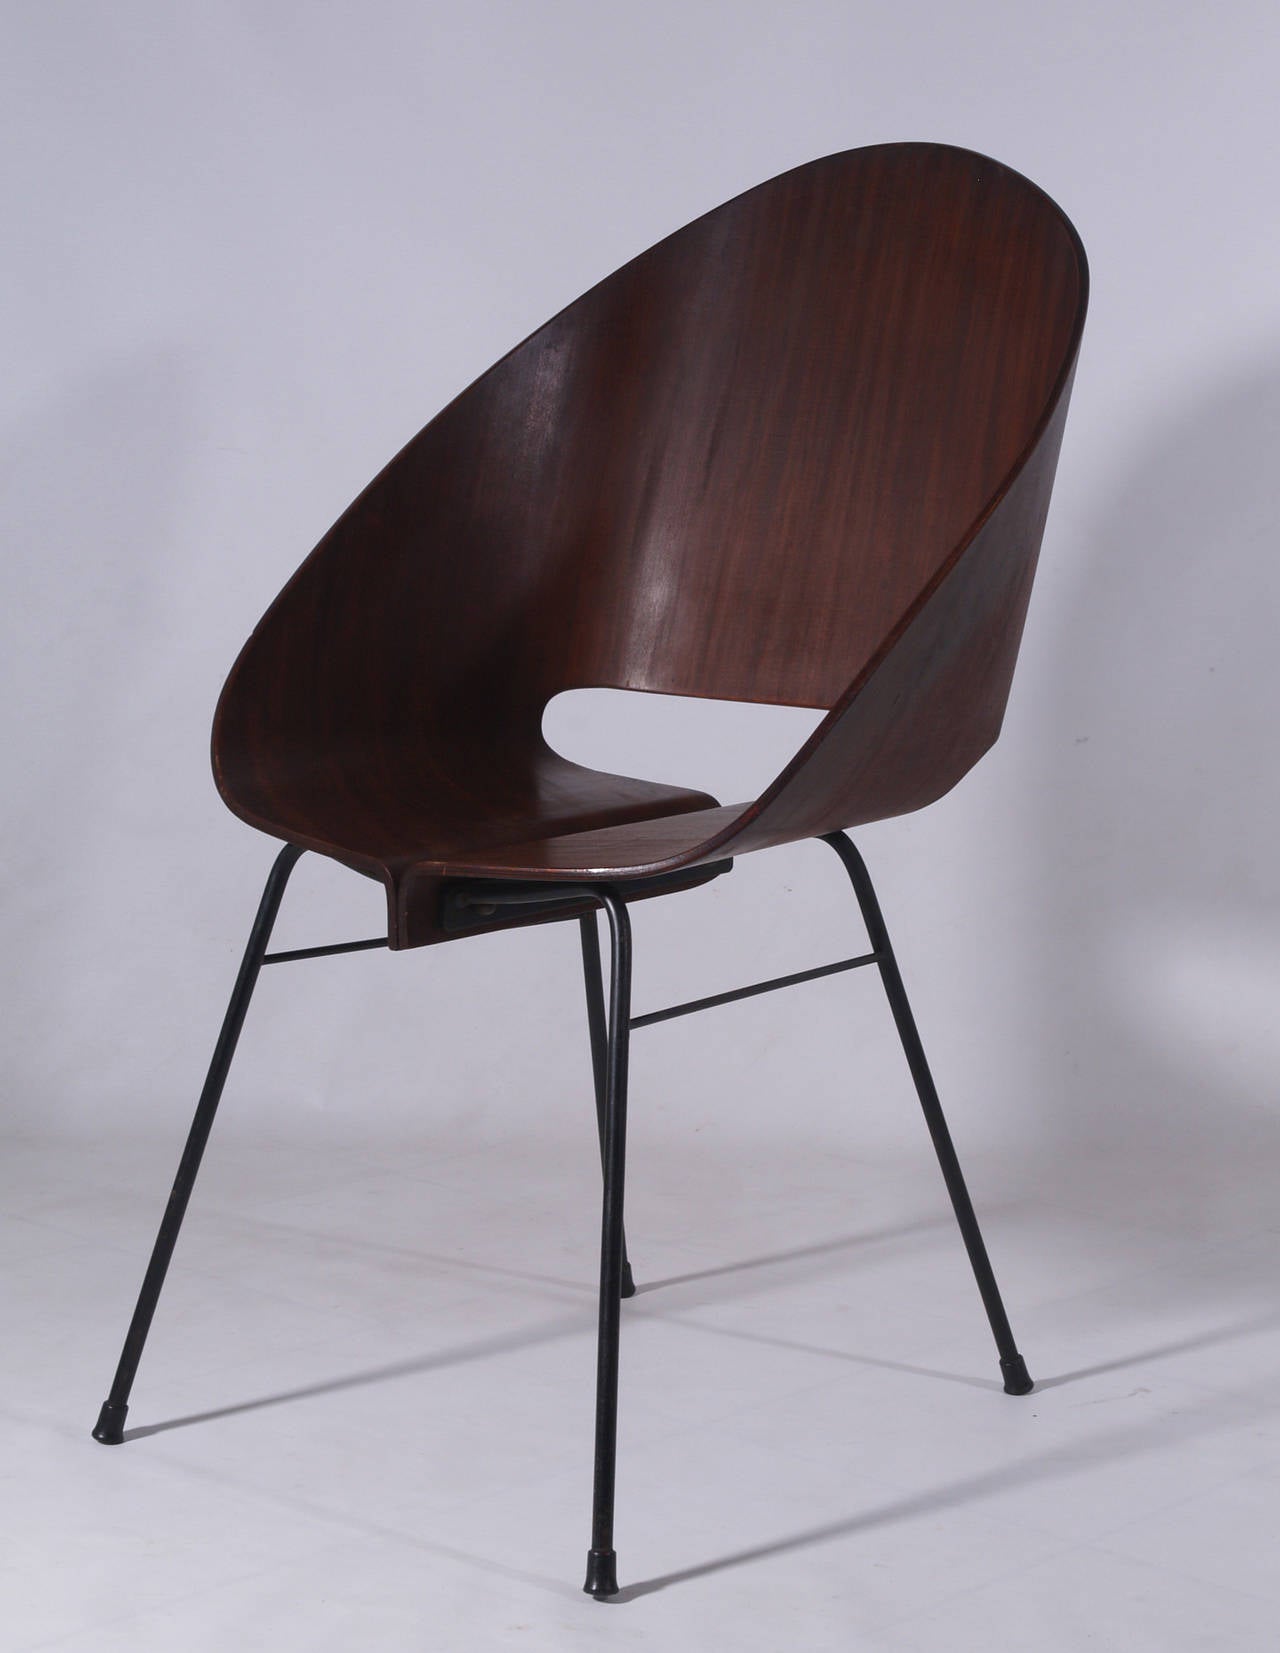 Four stacking chairs,
attributed Vittorio Nobili,
Italy, 1950.
molded mahagoni plywood,
black lacquered iron legs.
Measure: width 20" (50cm), depth 21" (55cm), height31" (81cm).